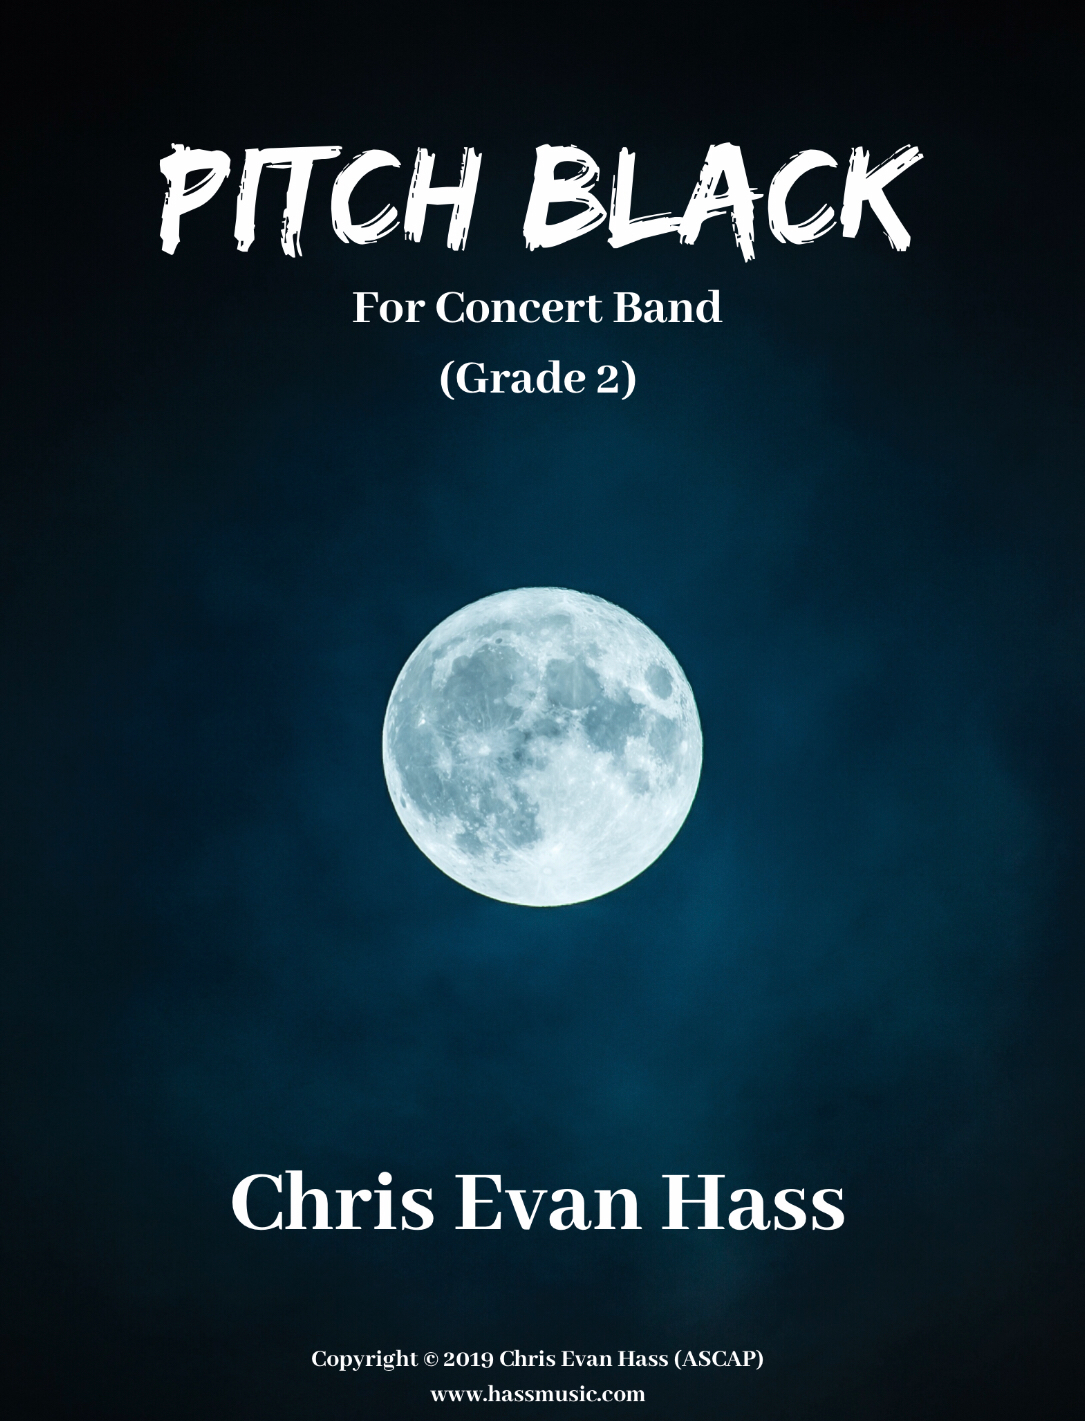 Pitch Black by Chris Evan Hass